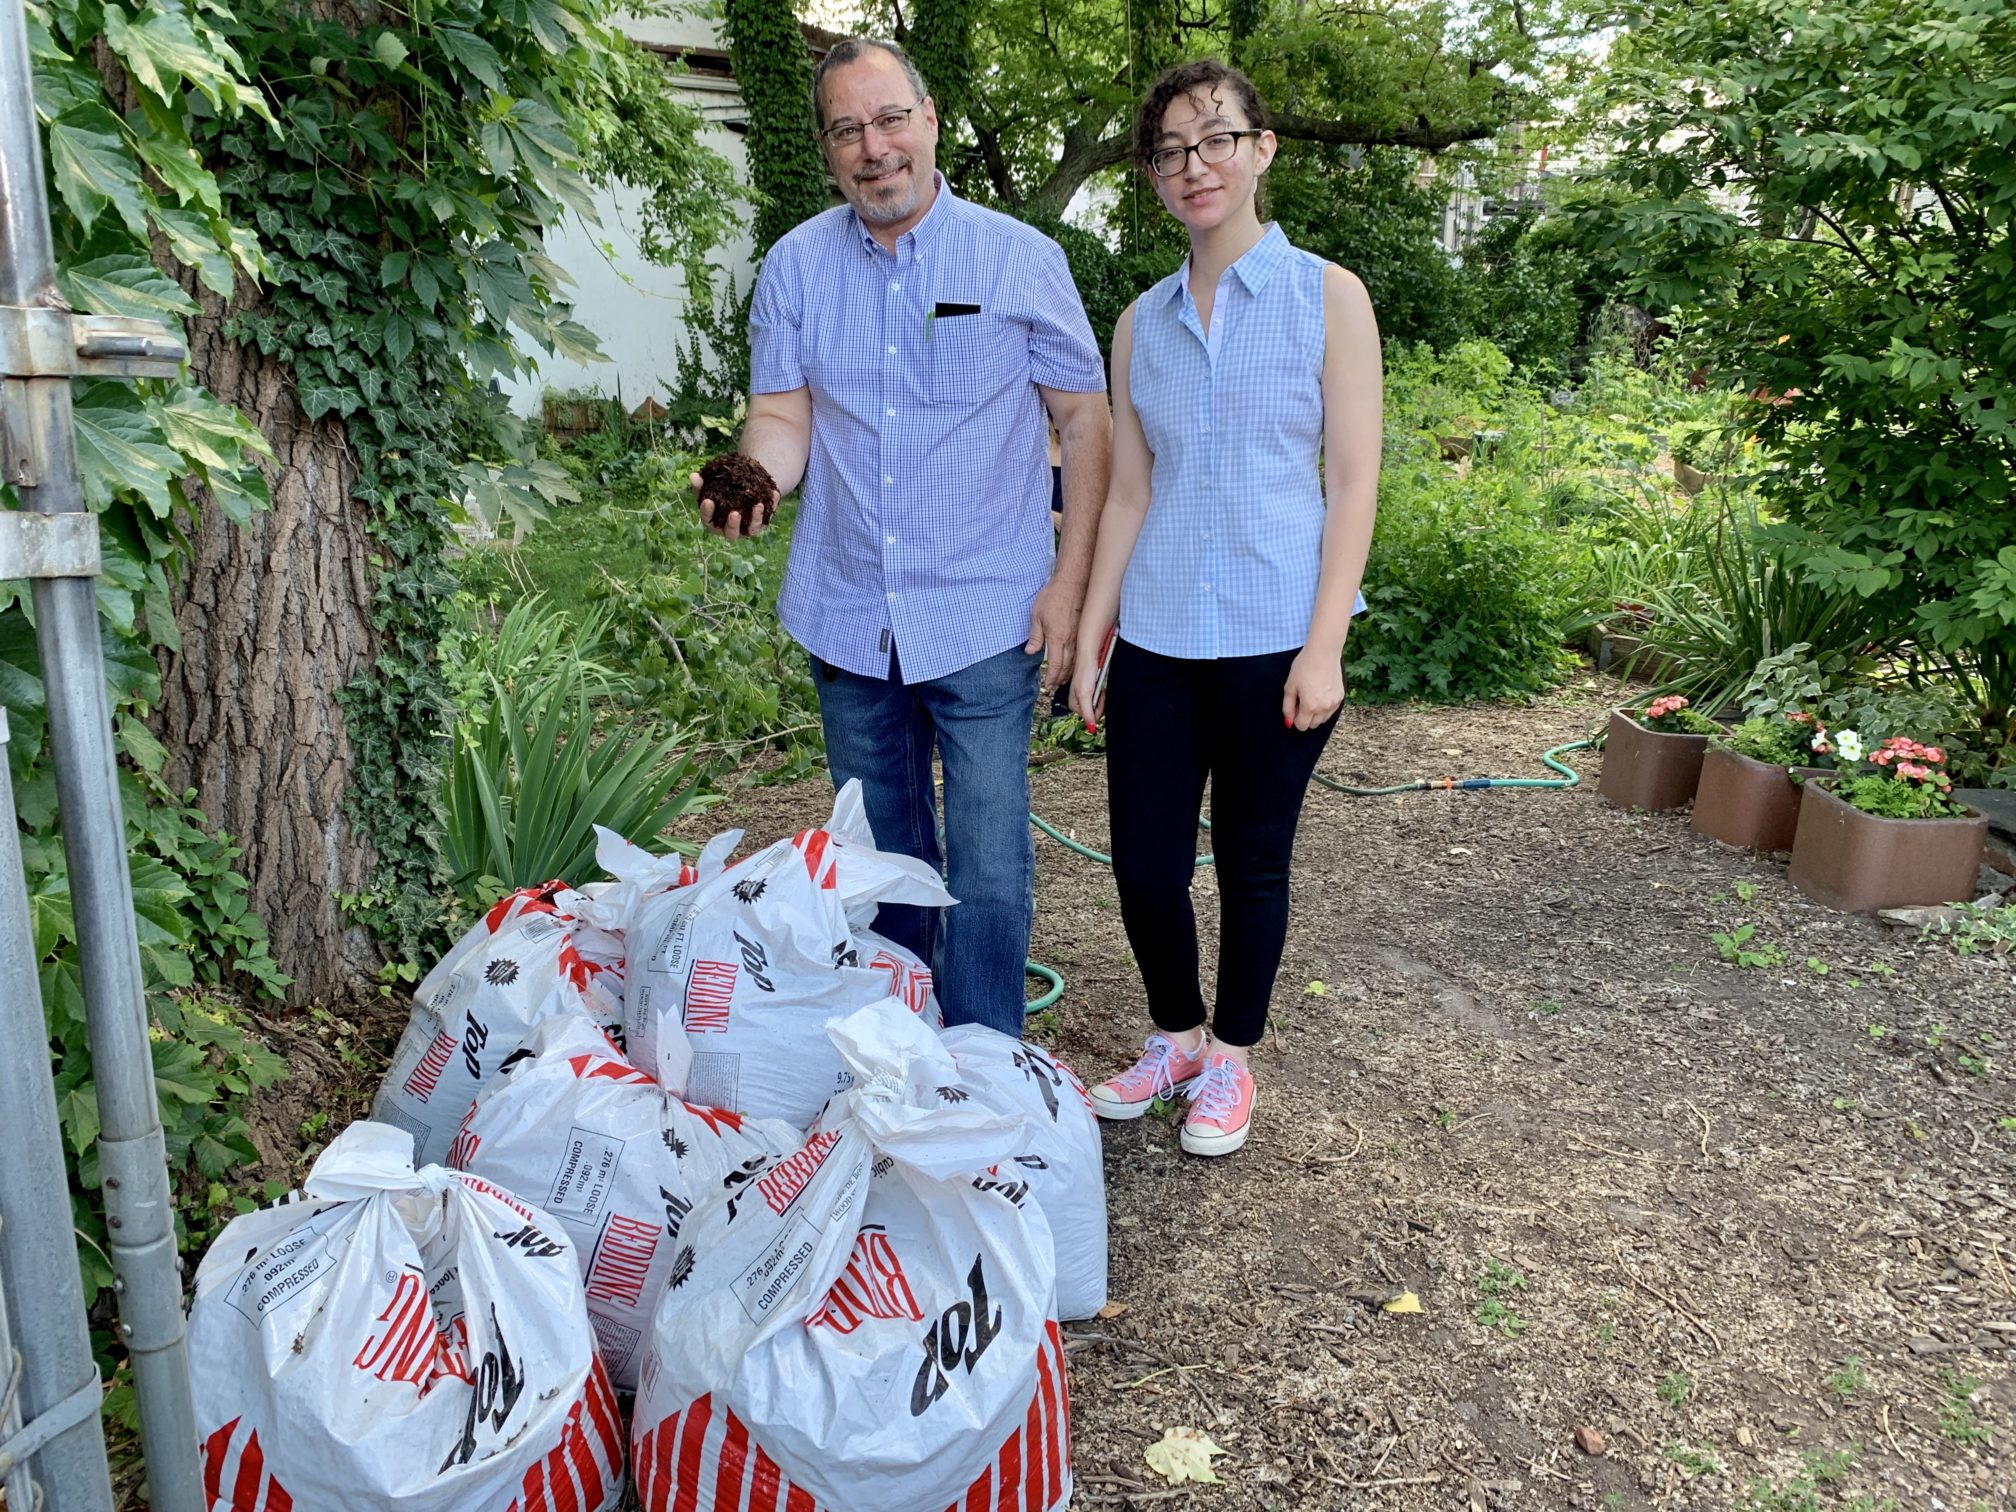 John Quadrozzi Jr., left, and his daughter Xiana rip open one of the first bags of composted manure delivered to Red Hook’s Backyard Community Garden on Sunday. Xiana is a partner with her dad in Prospect Park Stable. Eagle photo by Mary Frost